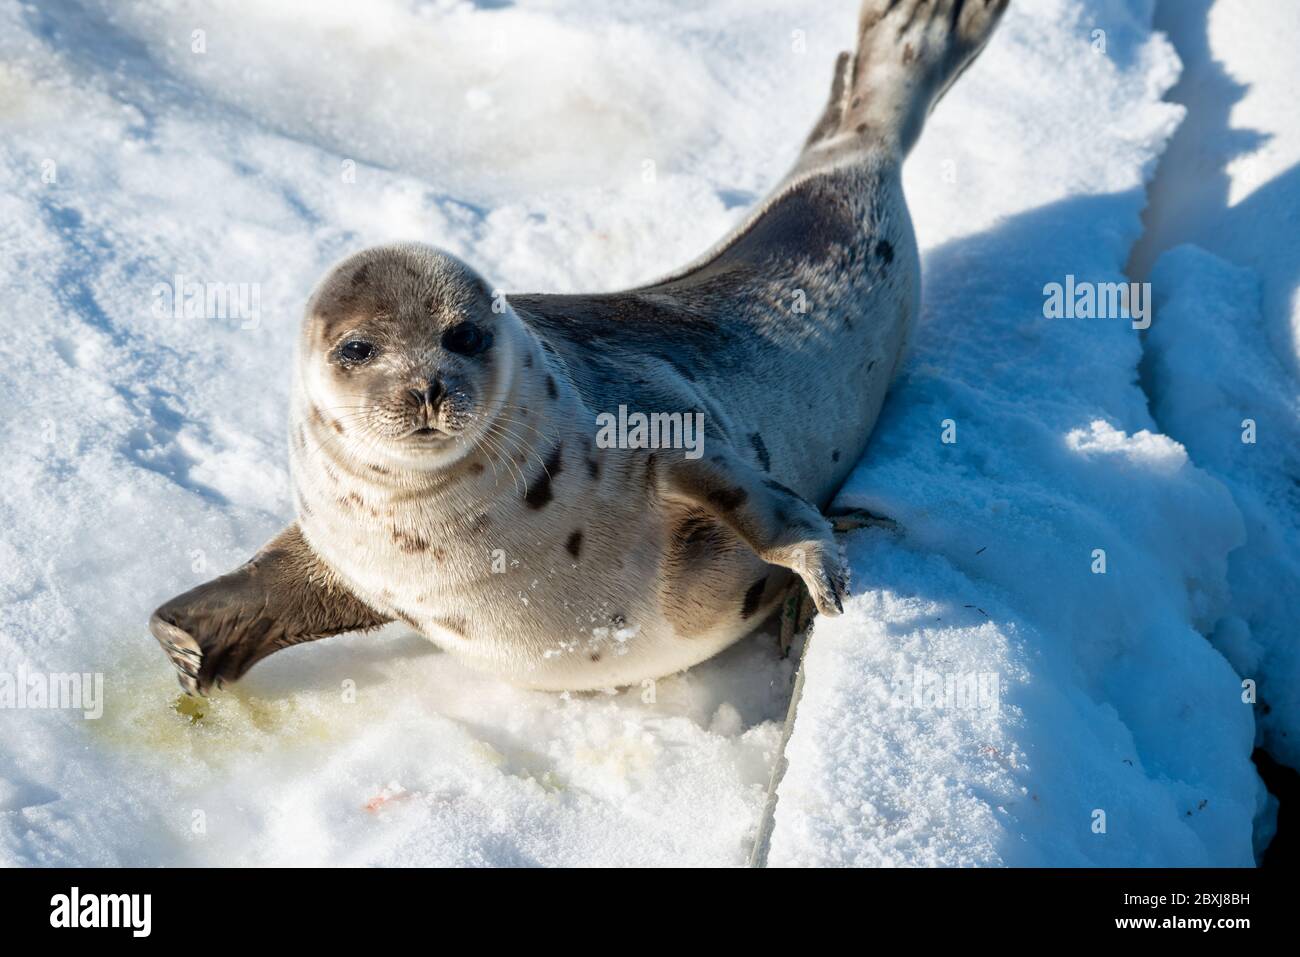 A young harp seal lays on a bed of white snow with the sun shining on its soft grey fur coat with dark spots. Stock Photo